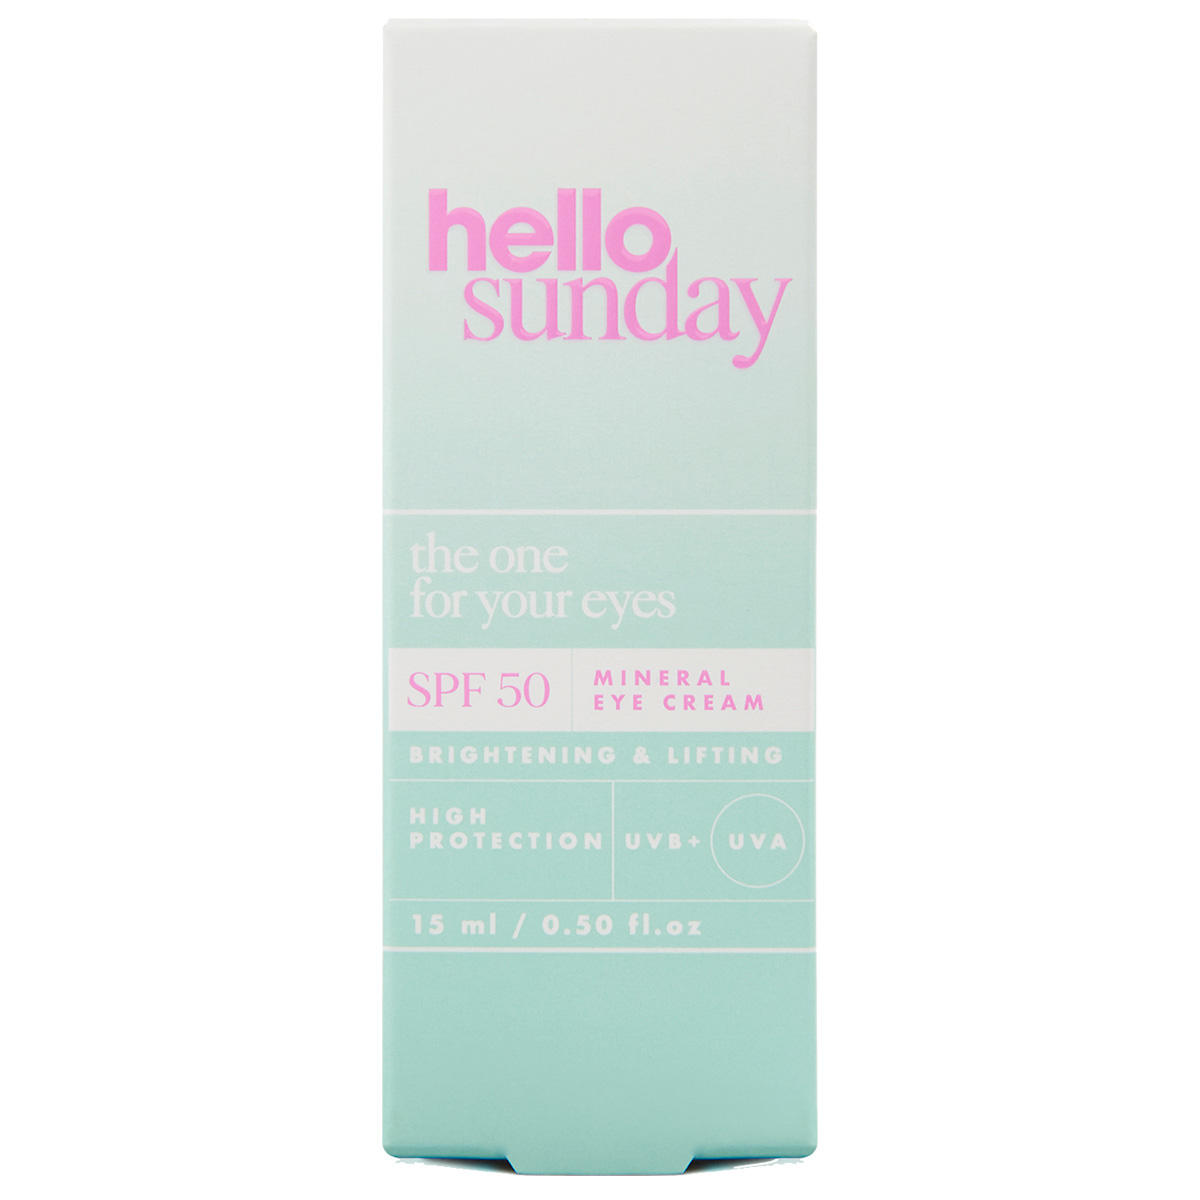 hello sunday the one for your eyes Mineral eye cream SPF 50 15 ml - 4